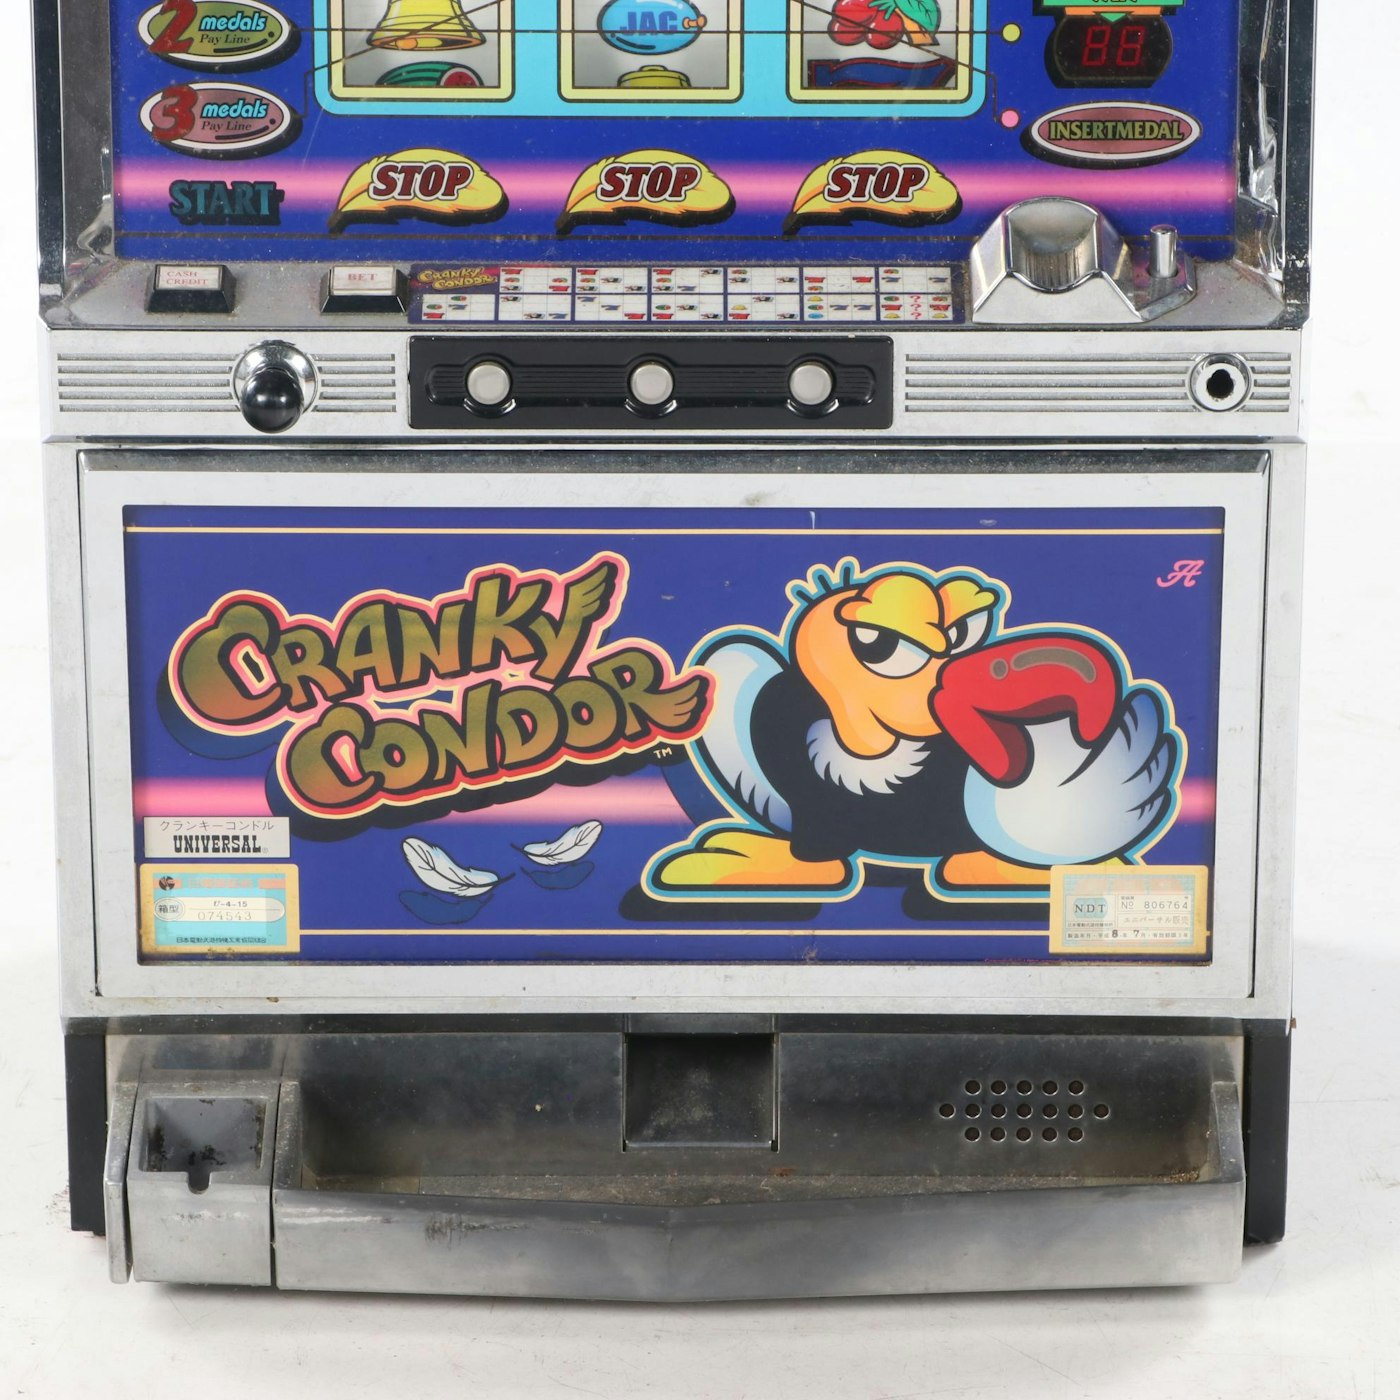 Cranky Condor Electric Coin Operated Table Top Slot Machine Ebth 